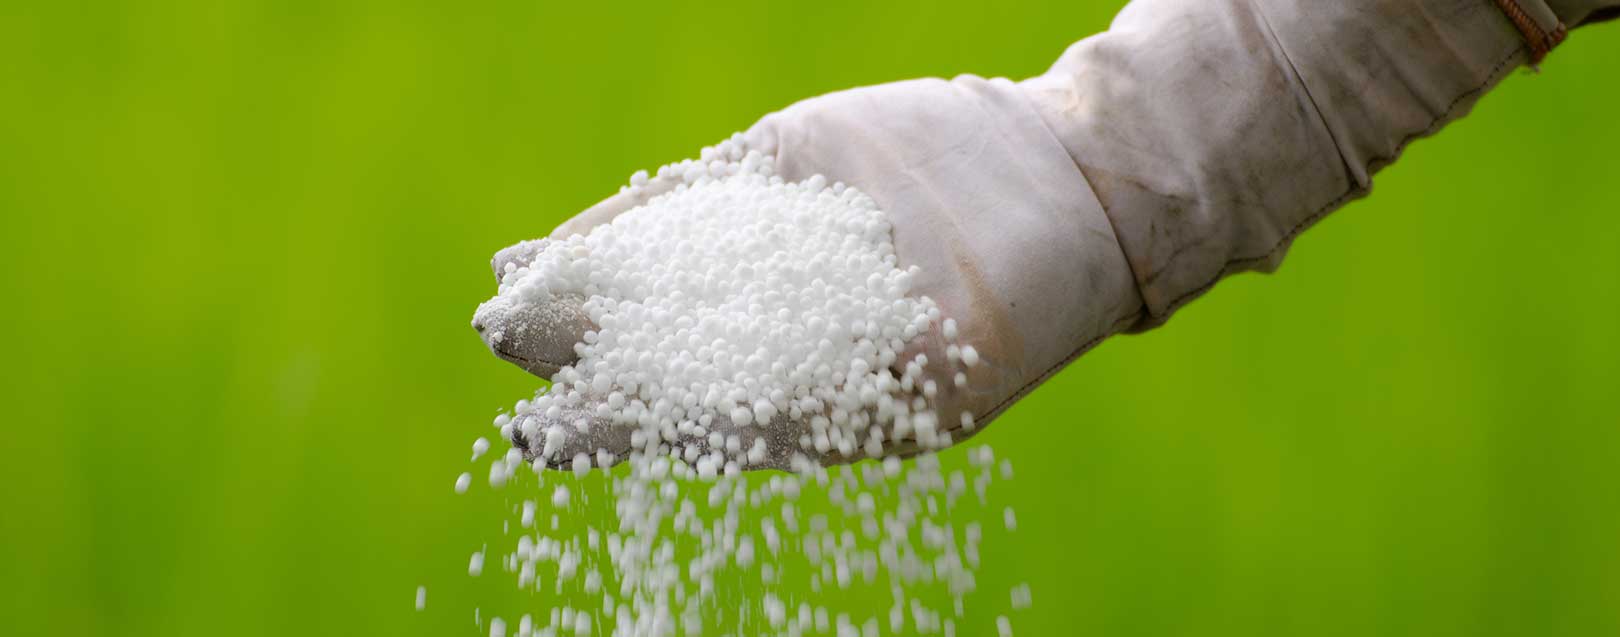 Govt will not hike urea prices for the next 3 yrs